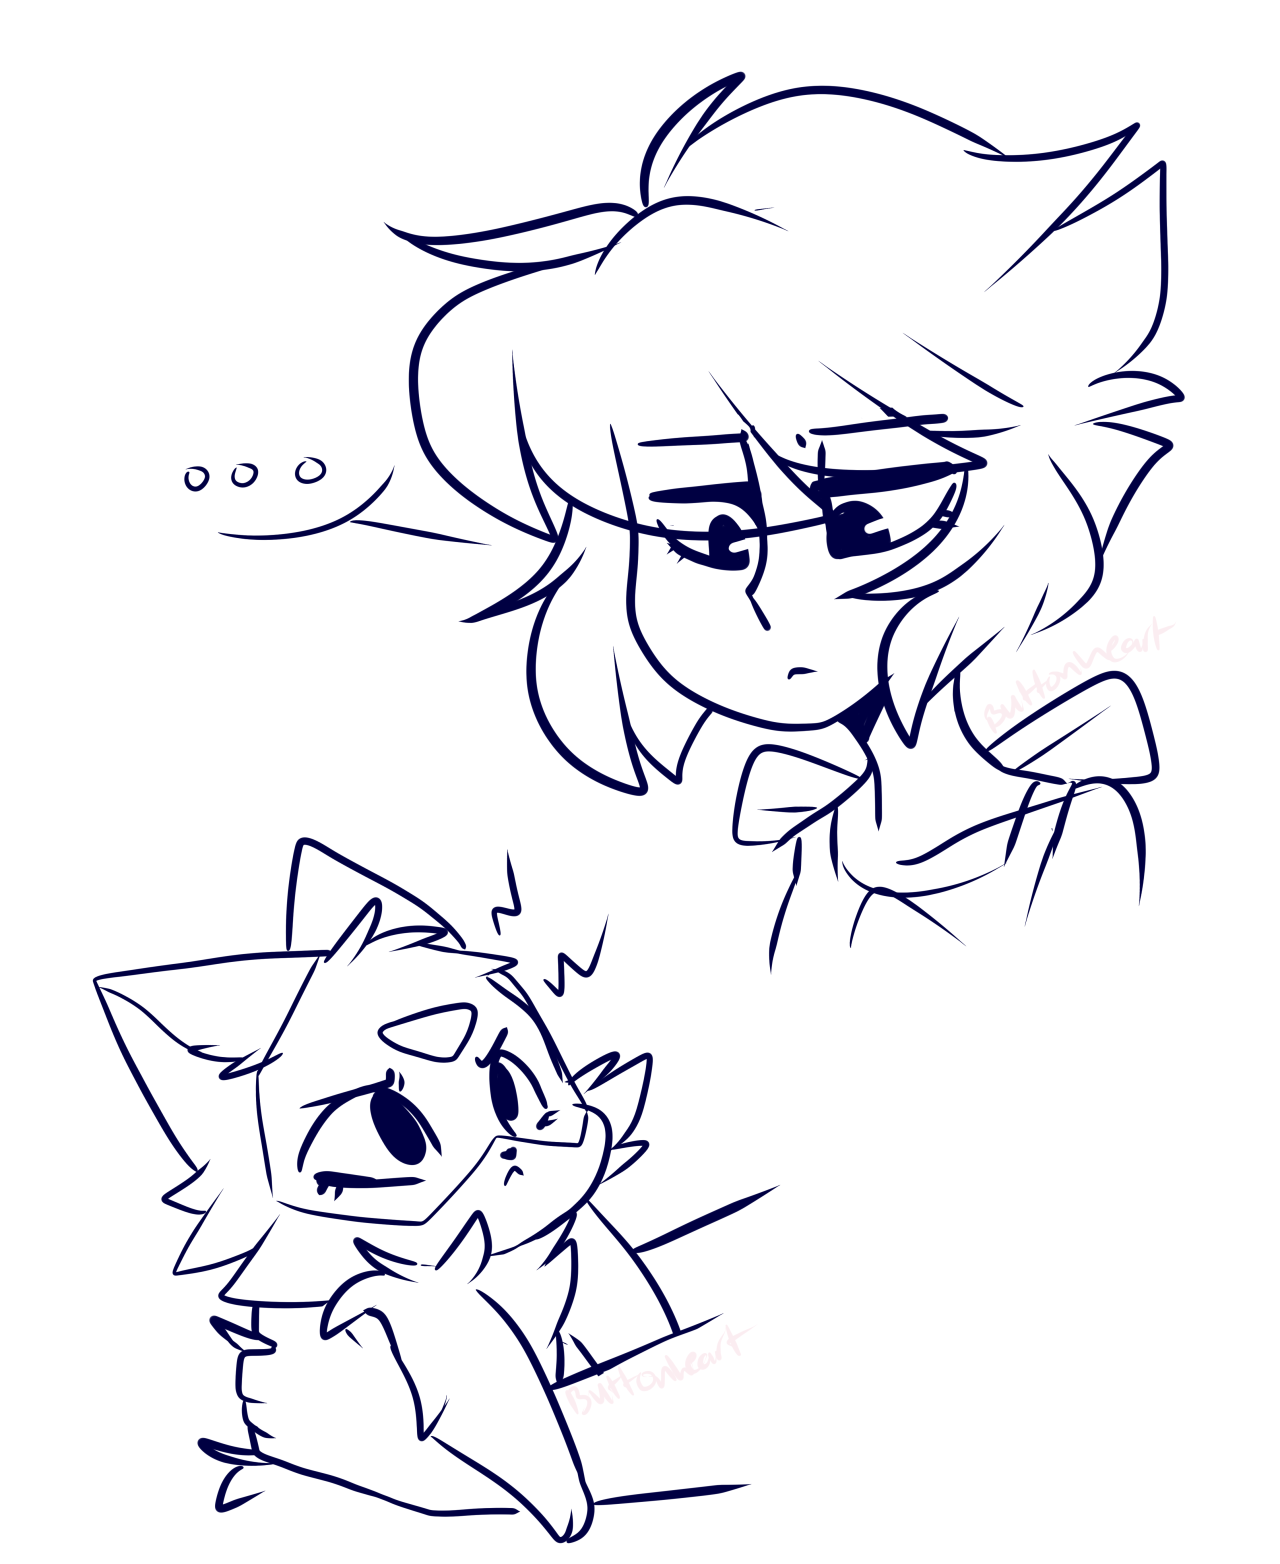 protoform-x6879 said: Draw lapis holding Peri but Peri is a kitten Answer: She scratch